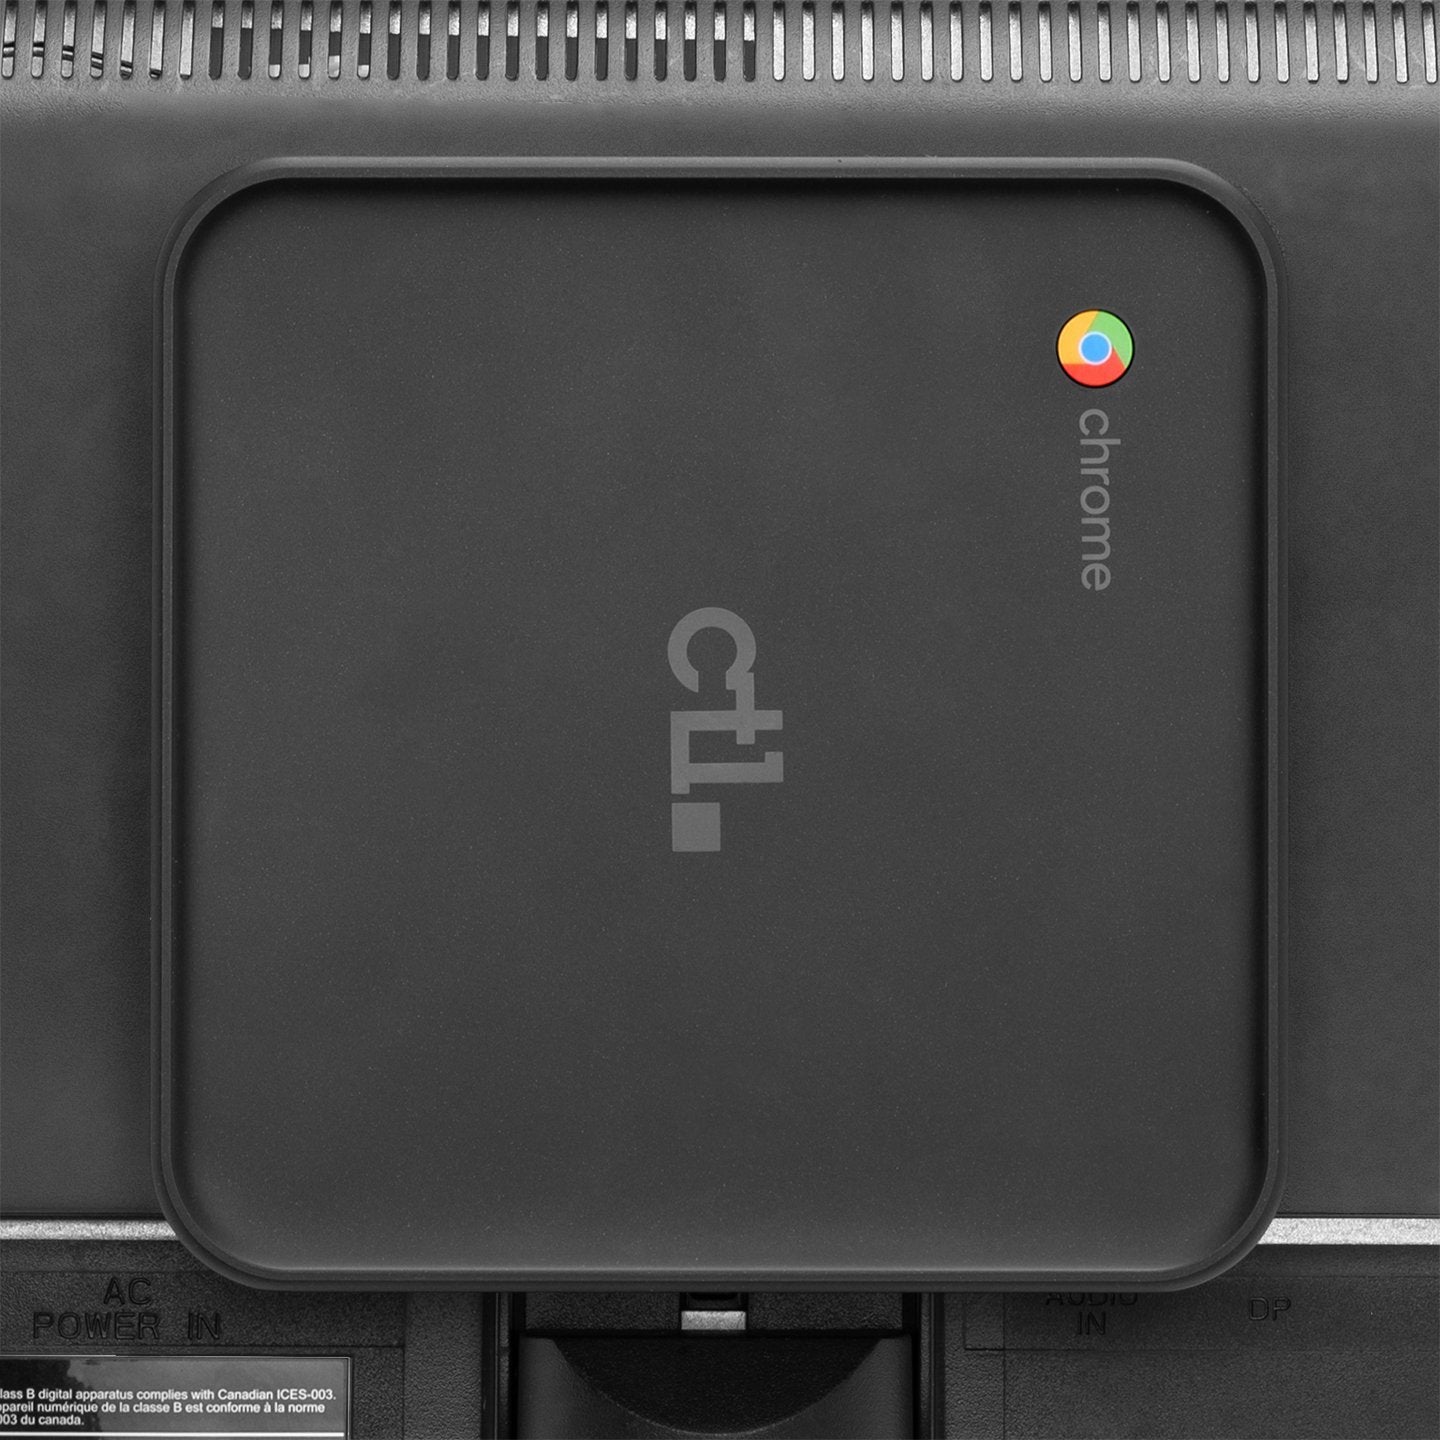 CTL Chromebox 2 Core i7 CTL22CBX2-7 2-In-1 with IP2155 22" Display